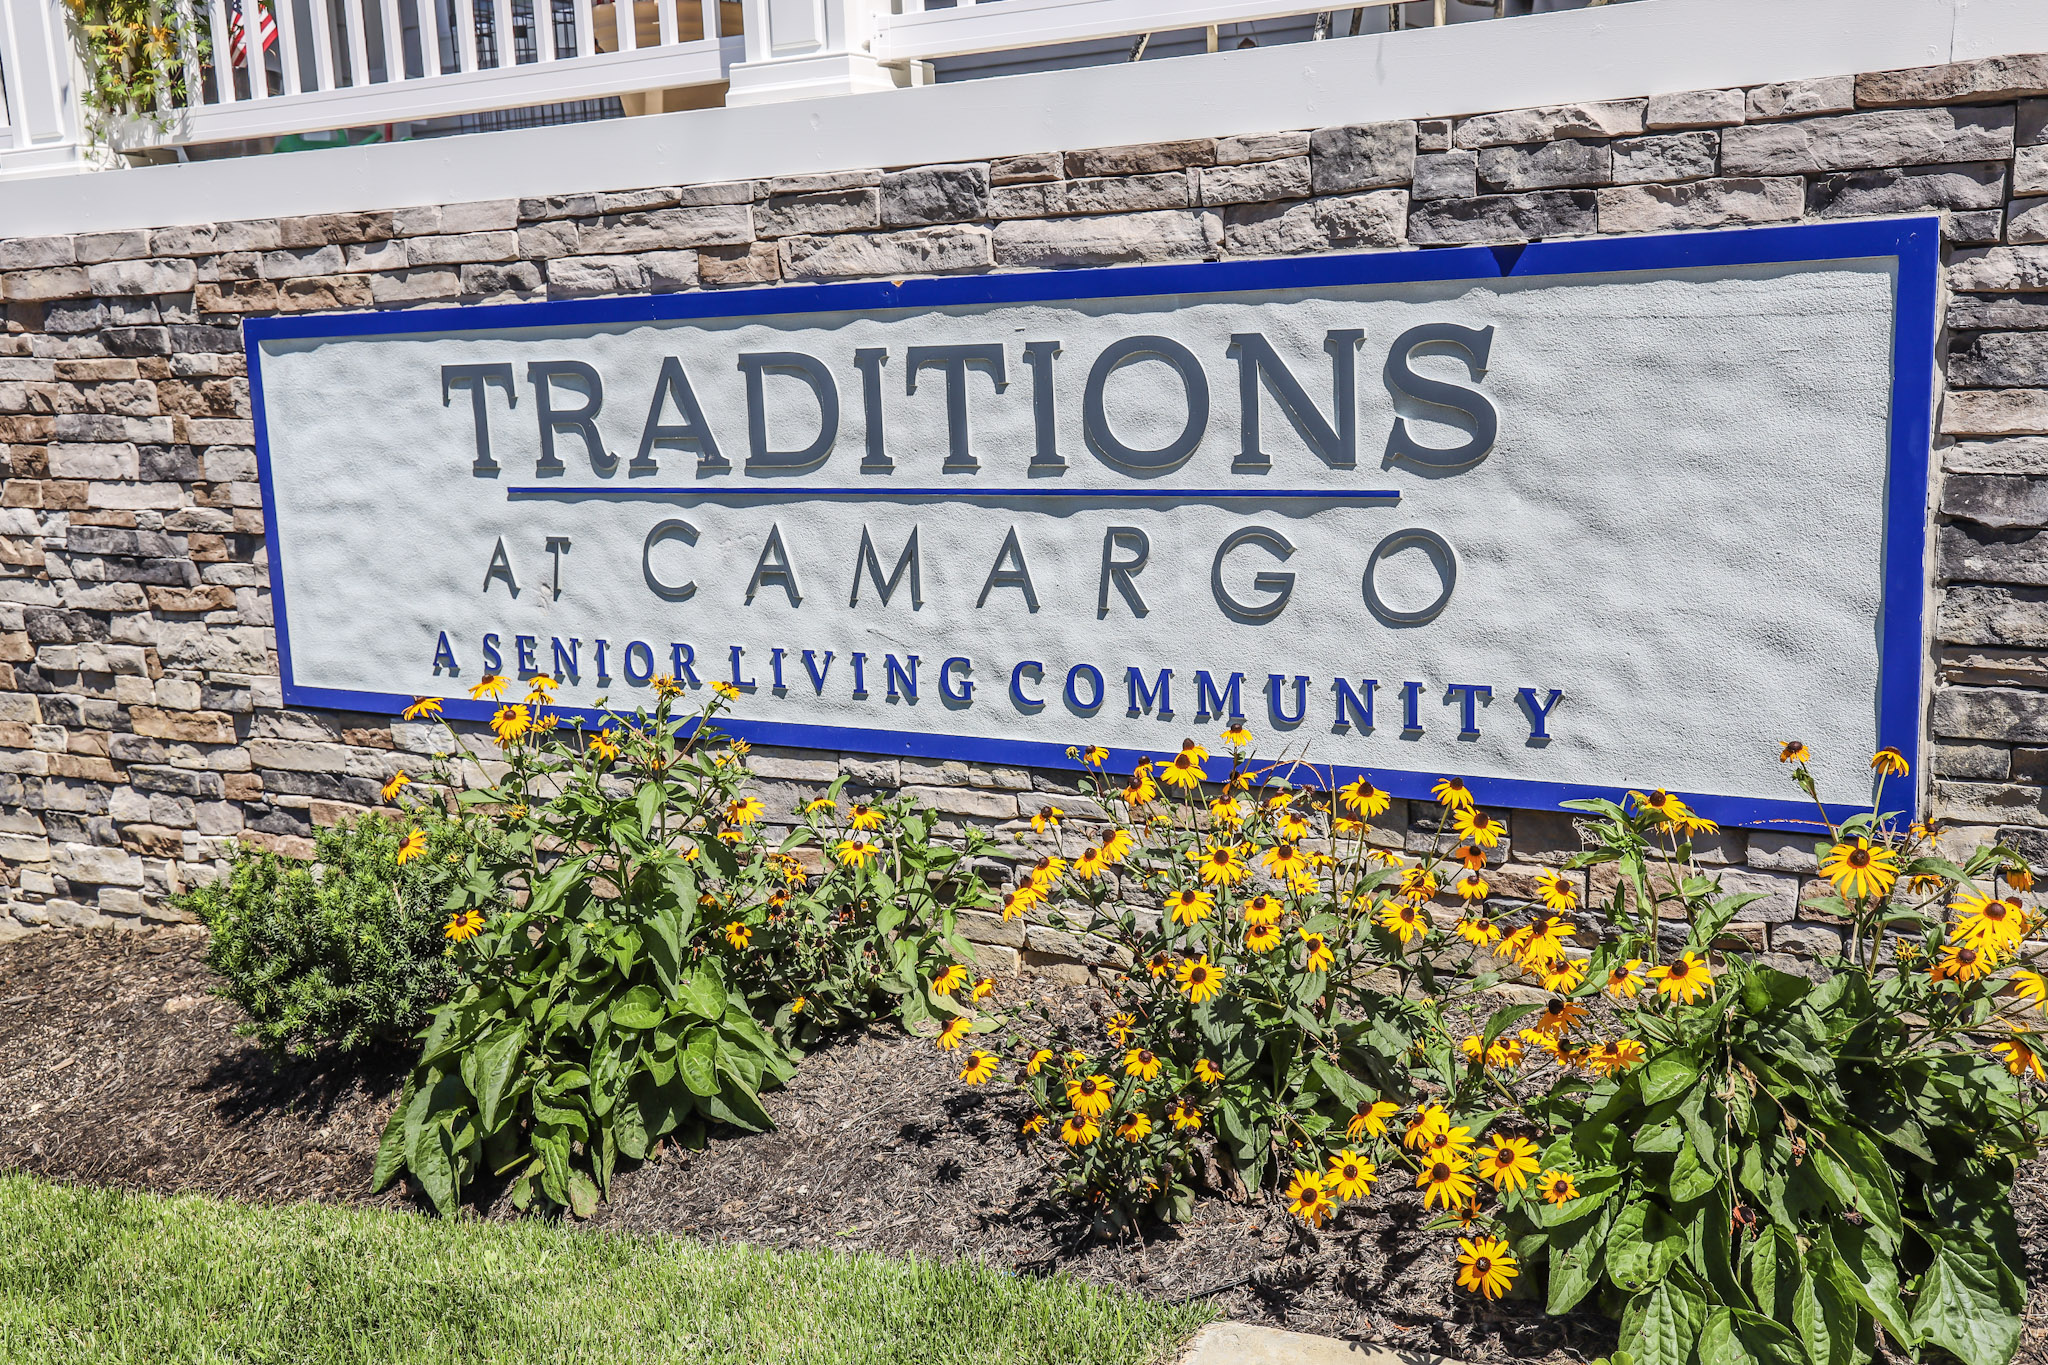 Traditions at Camargo image